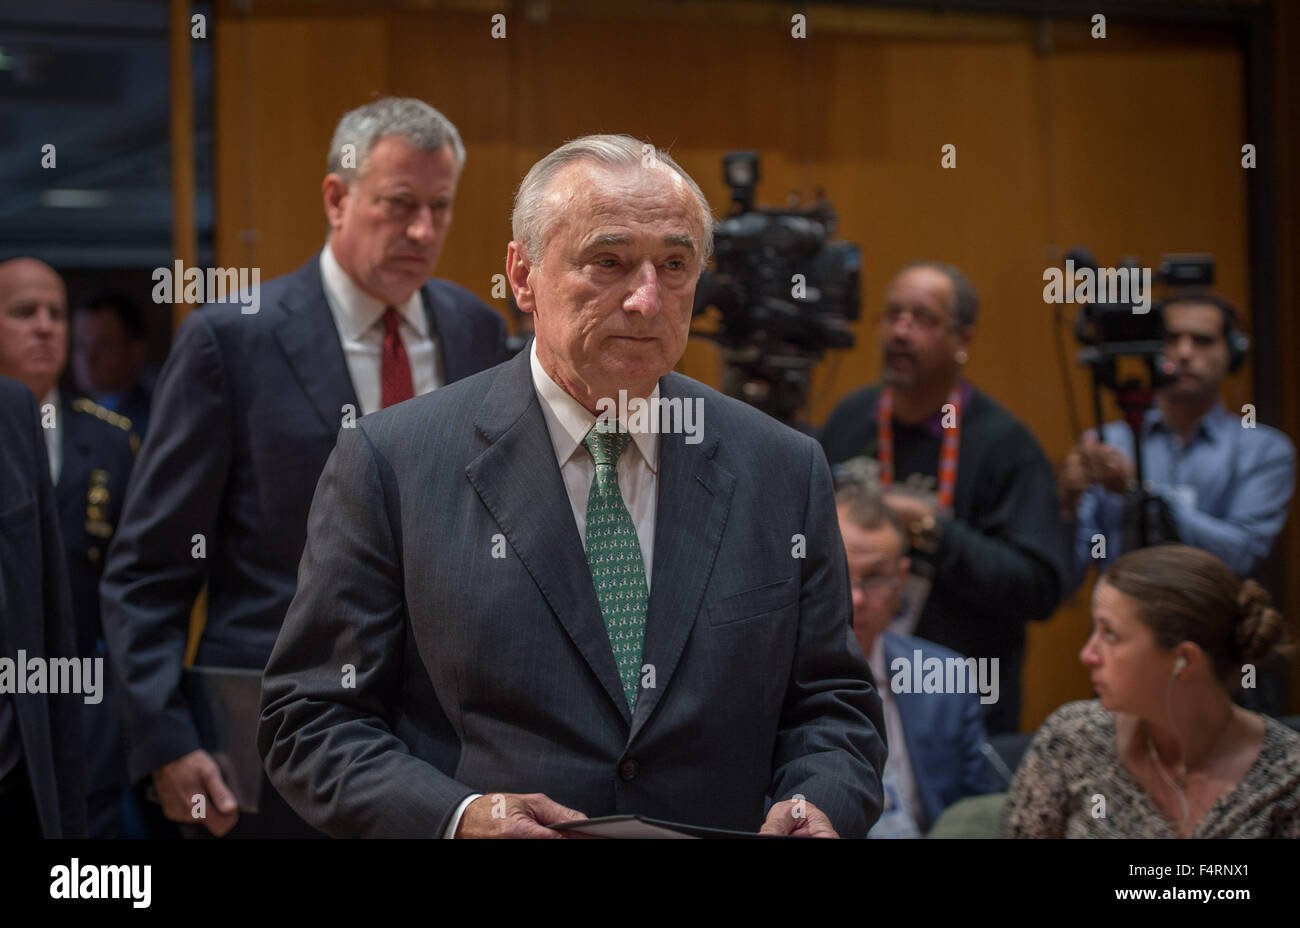 New York, NY, USA. 21st Oct, 2015. NYPD Police Commissioner WILLIAM BRATTON and Mayor BILL DE BLASIO deliver an update on the murder of Police Officer Randolph Holder Wed., Oct. 21, 2015 at 1 Police Plaza. Credit:  Bryan Smith/ZUMA Wire/Alamy Live News Stock Photo